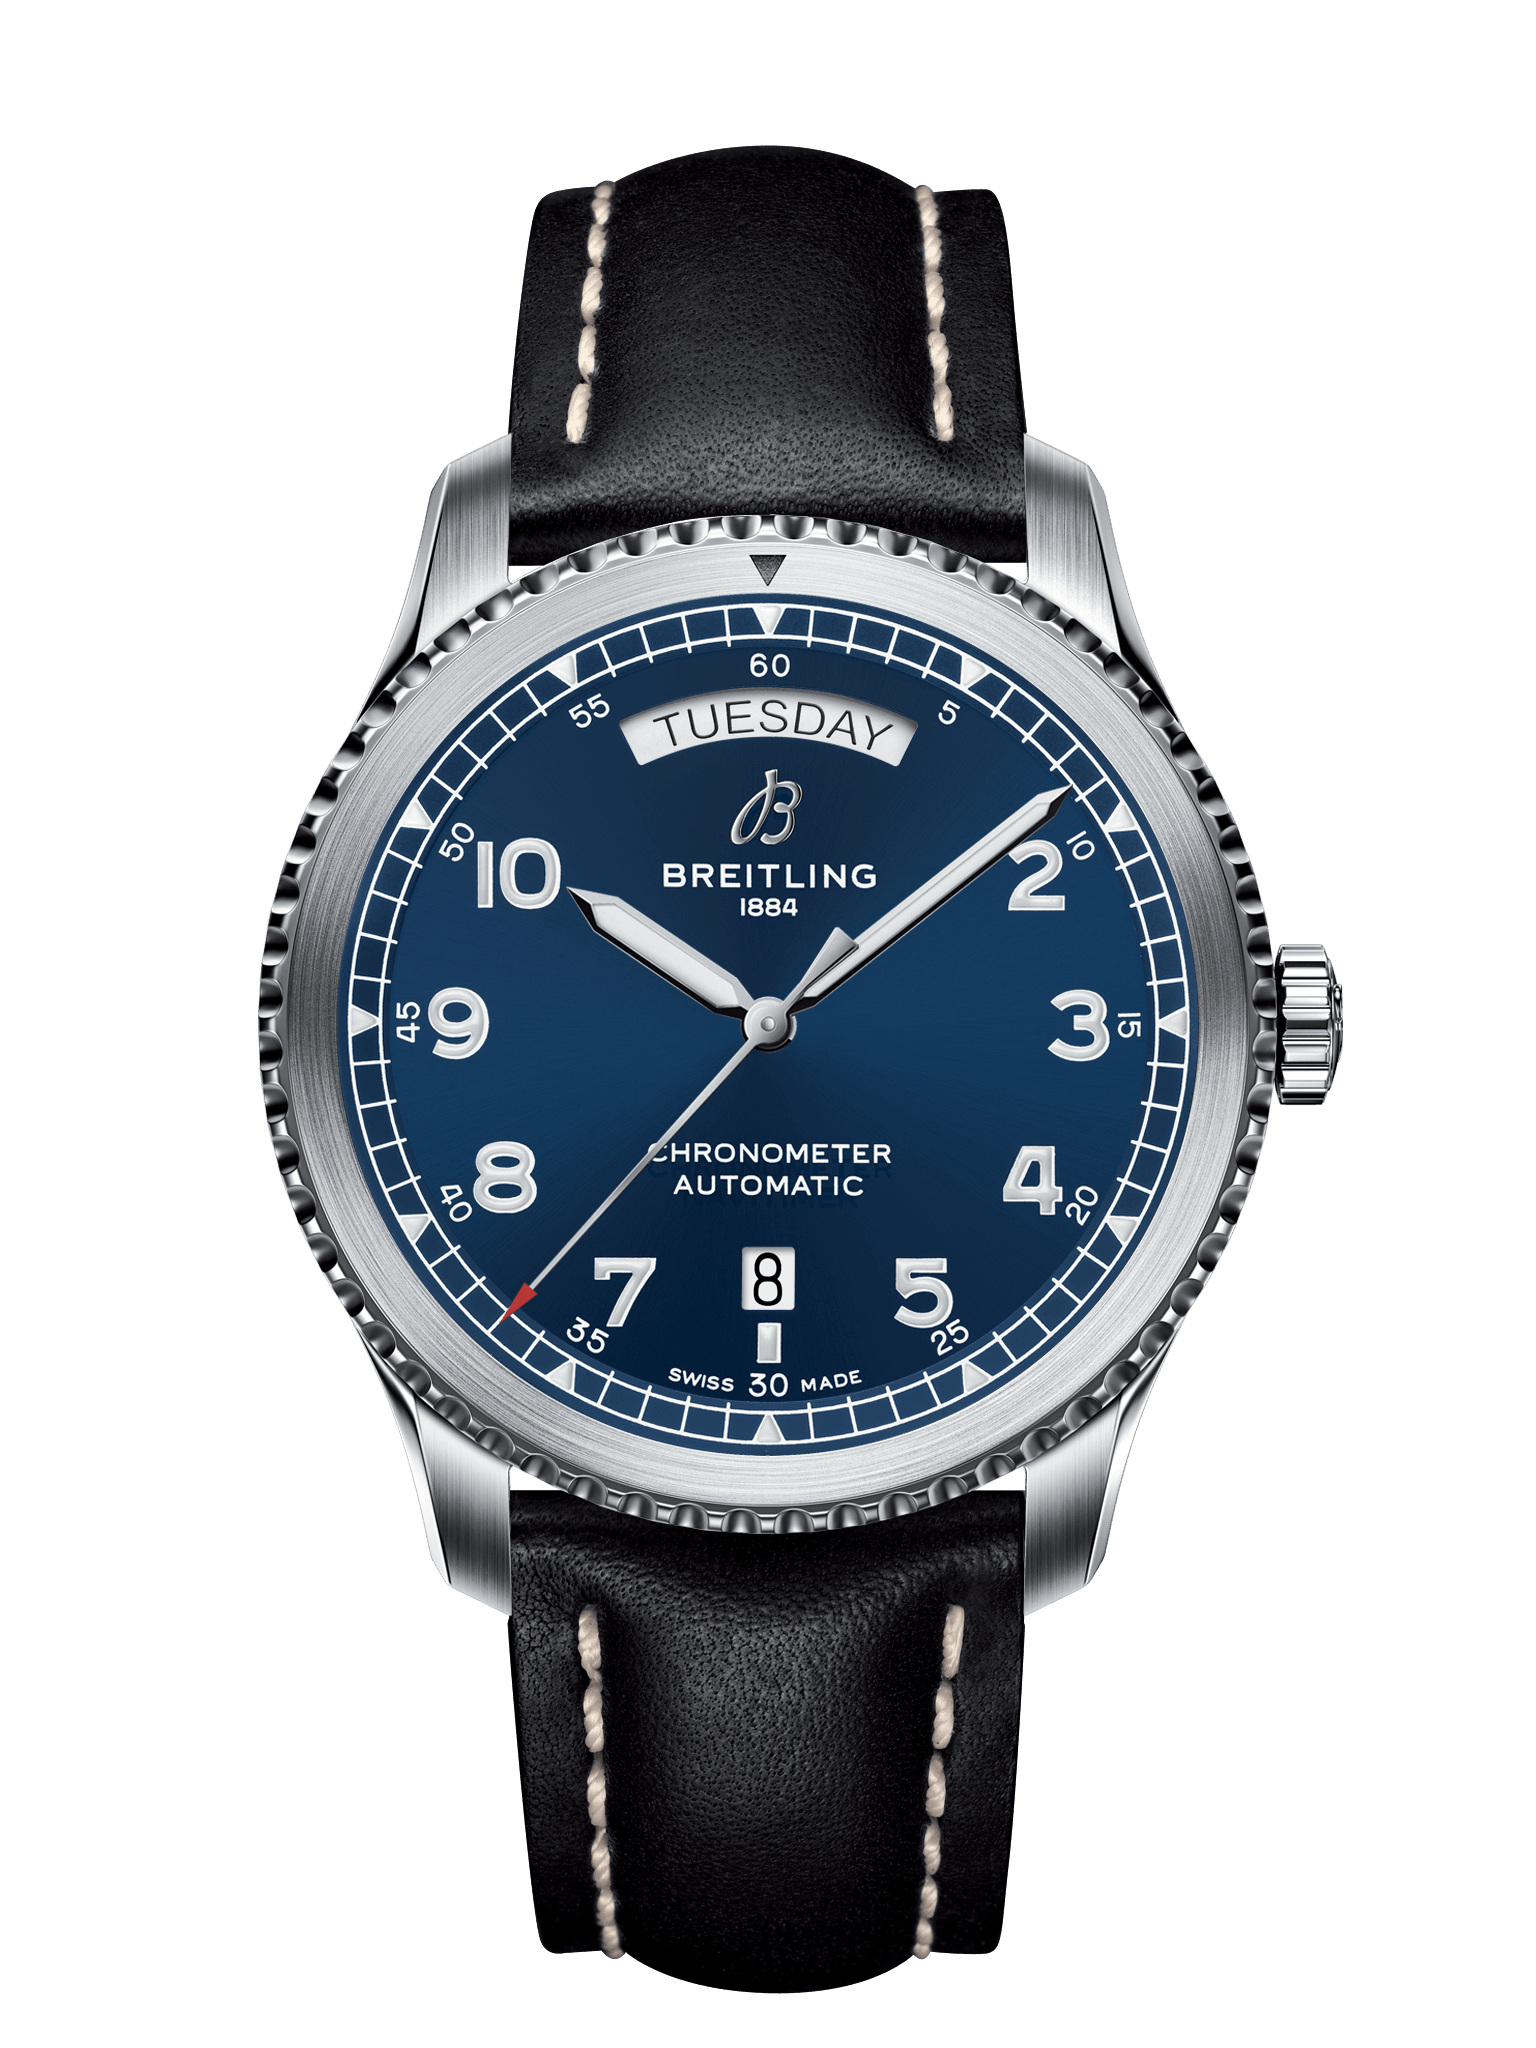 breitling : Timing 10th Anniversary Special Edition Chronograph: A13050 :